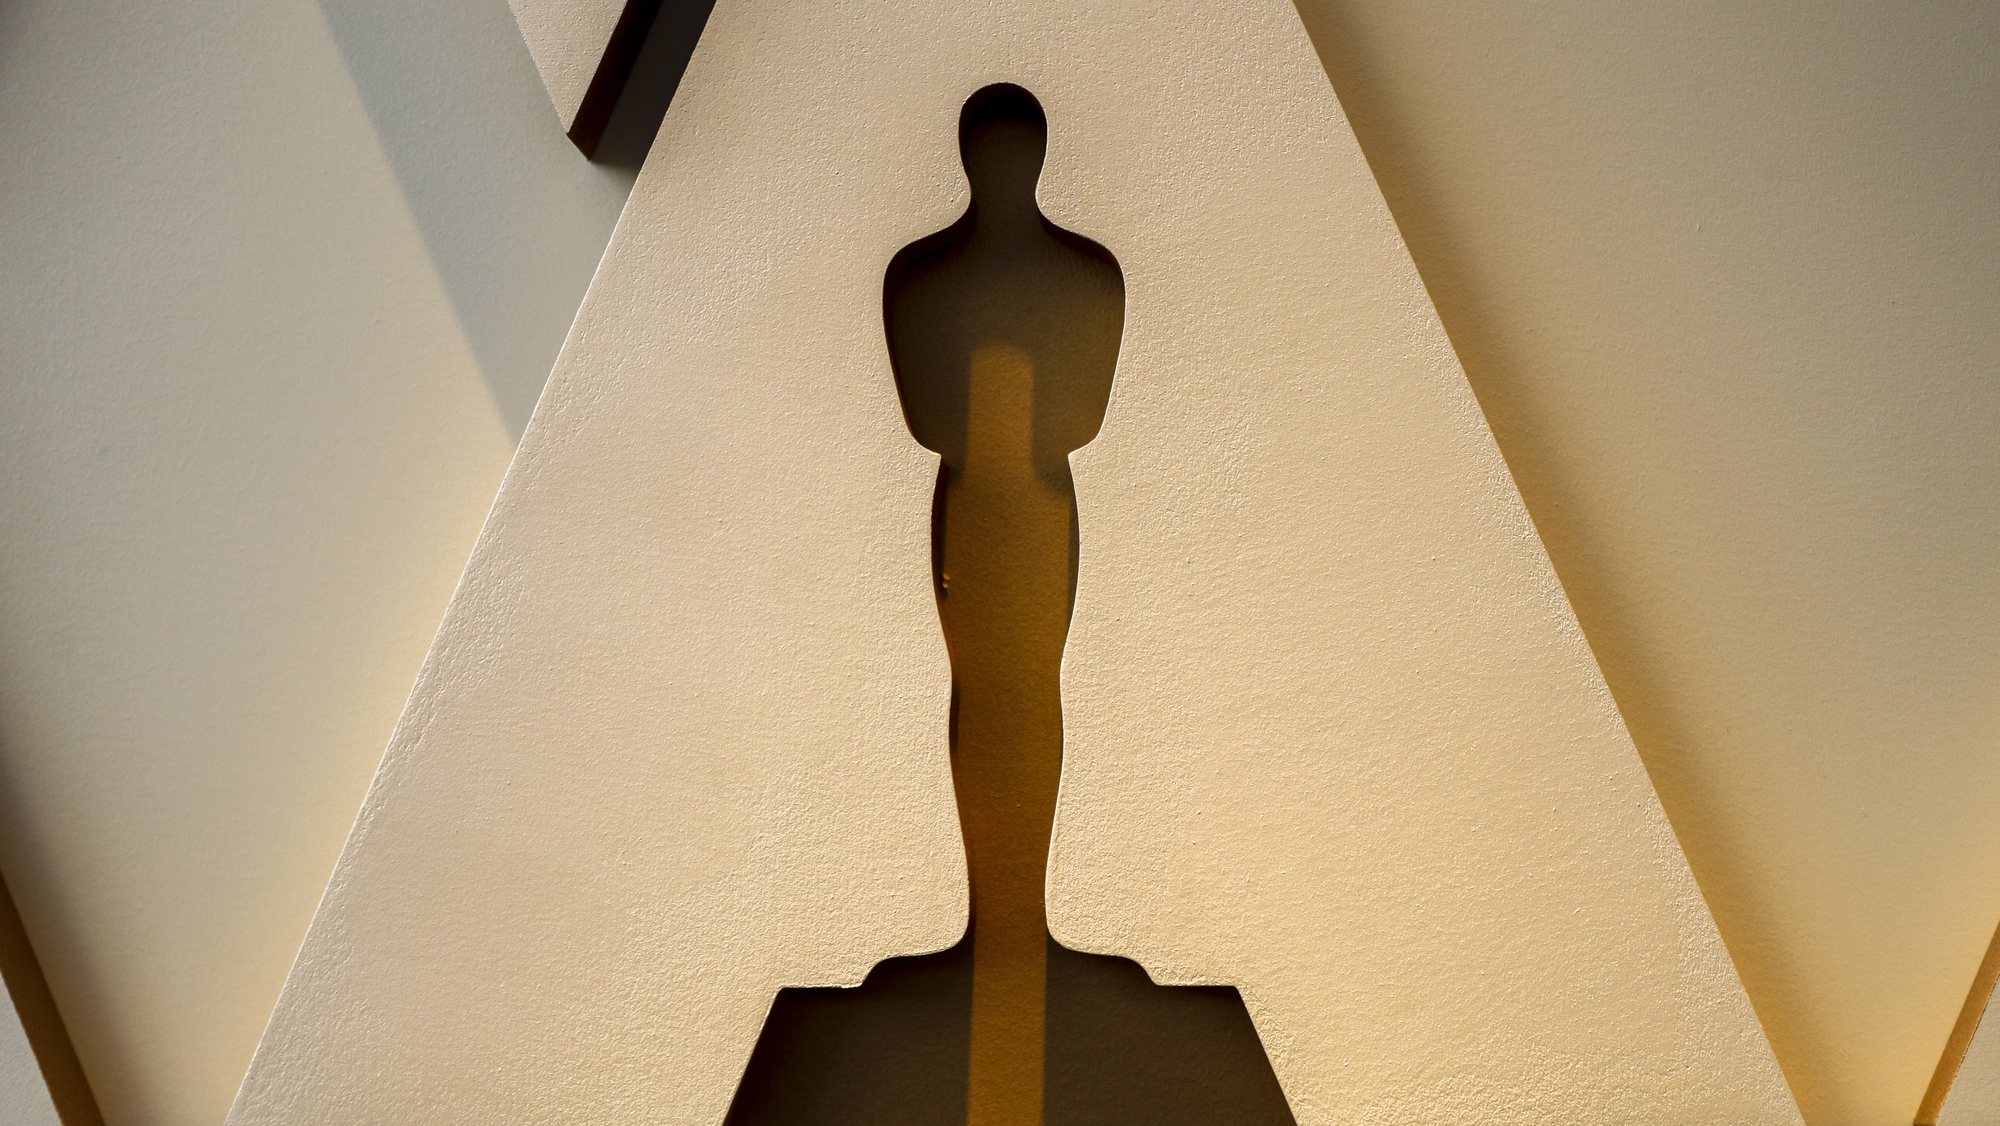 epa09849471 An Oscar silhouette is displayed on the red carpet as workers set up the area for the 94th annual Academy Awards ceremony in front of the Dolby Theater in Hollywood, California, USA, 25 March 2022. The Oscars will be presented at the Dolby Theatre for outstanding individual or collective efforts in filmmaking on 27 March 2022.  EPA/ETIENNE LAURENT